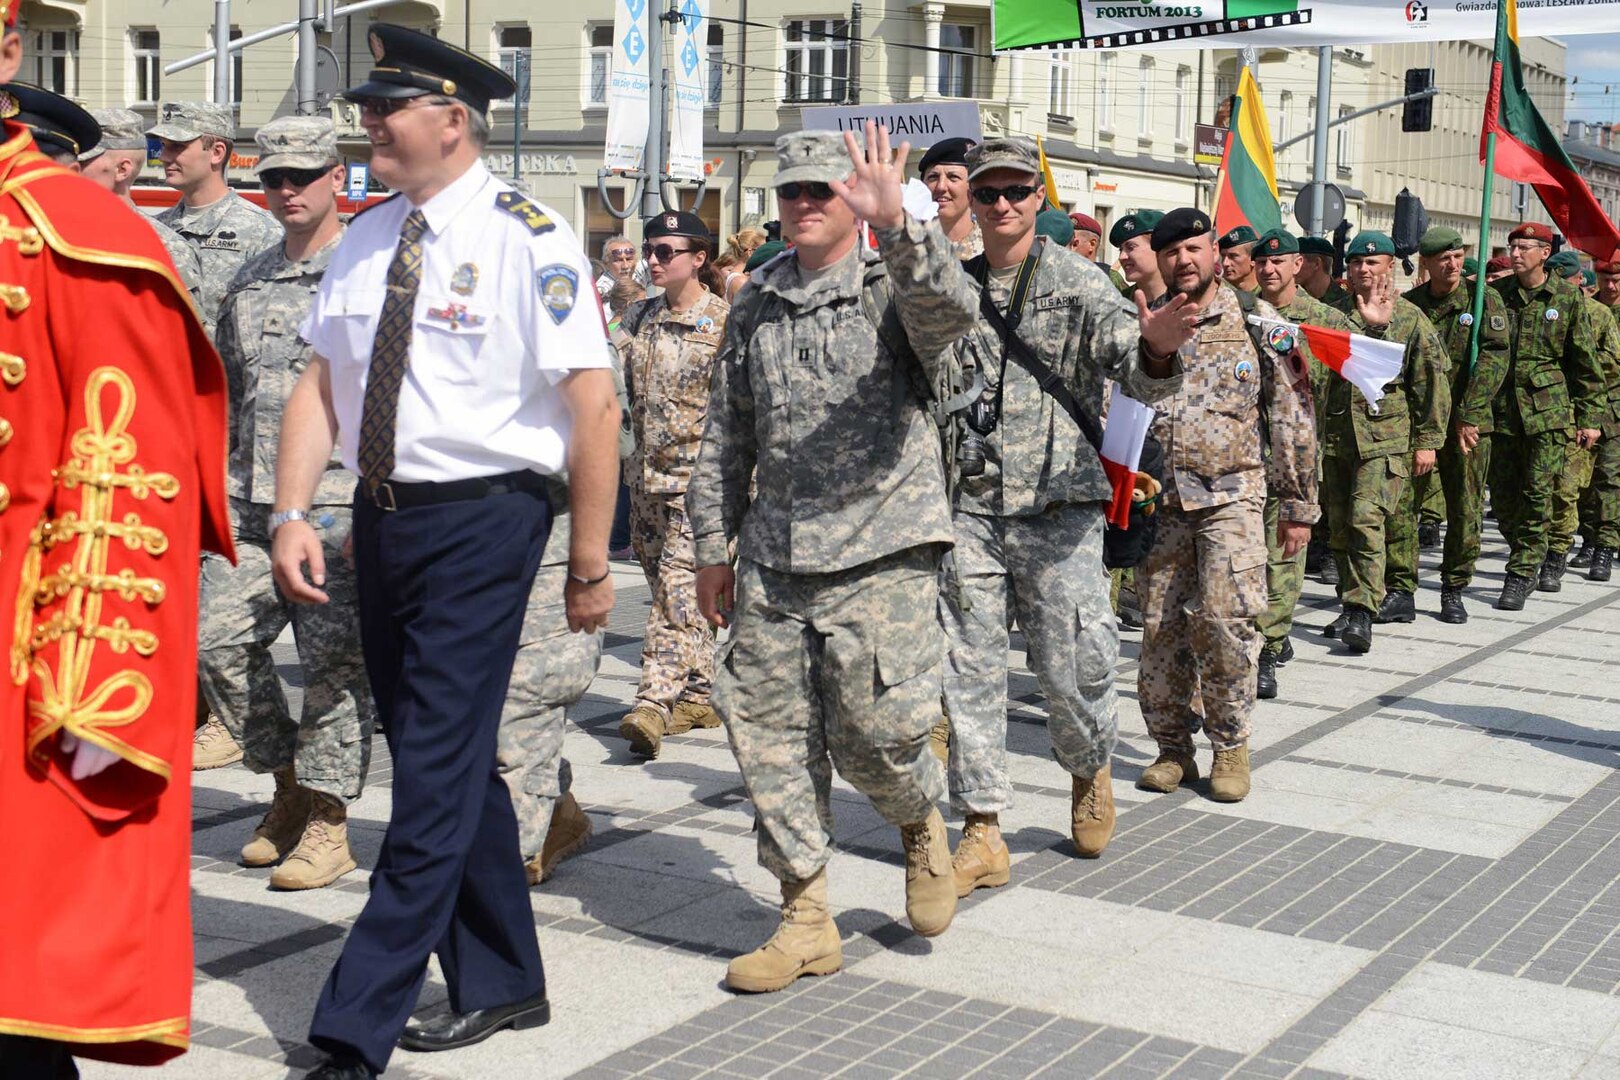 Illinois National Guard Chaplain J. Kroencke and Sgt. Ryan Twist wave to Polish people along the pilgrimage route in Czestochowa, Aug. 14, 2013.